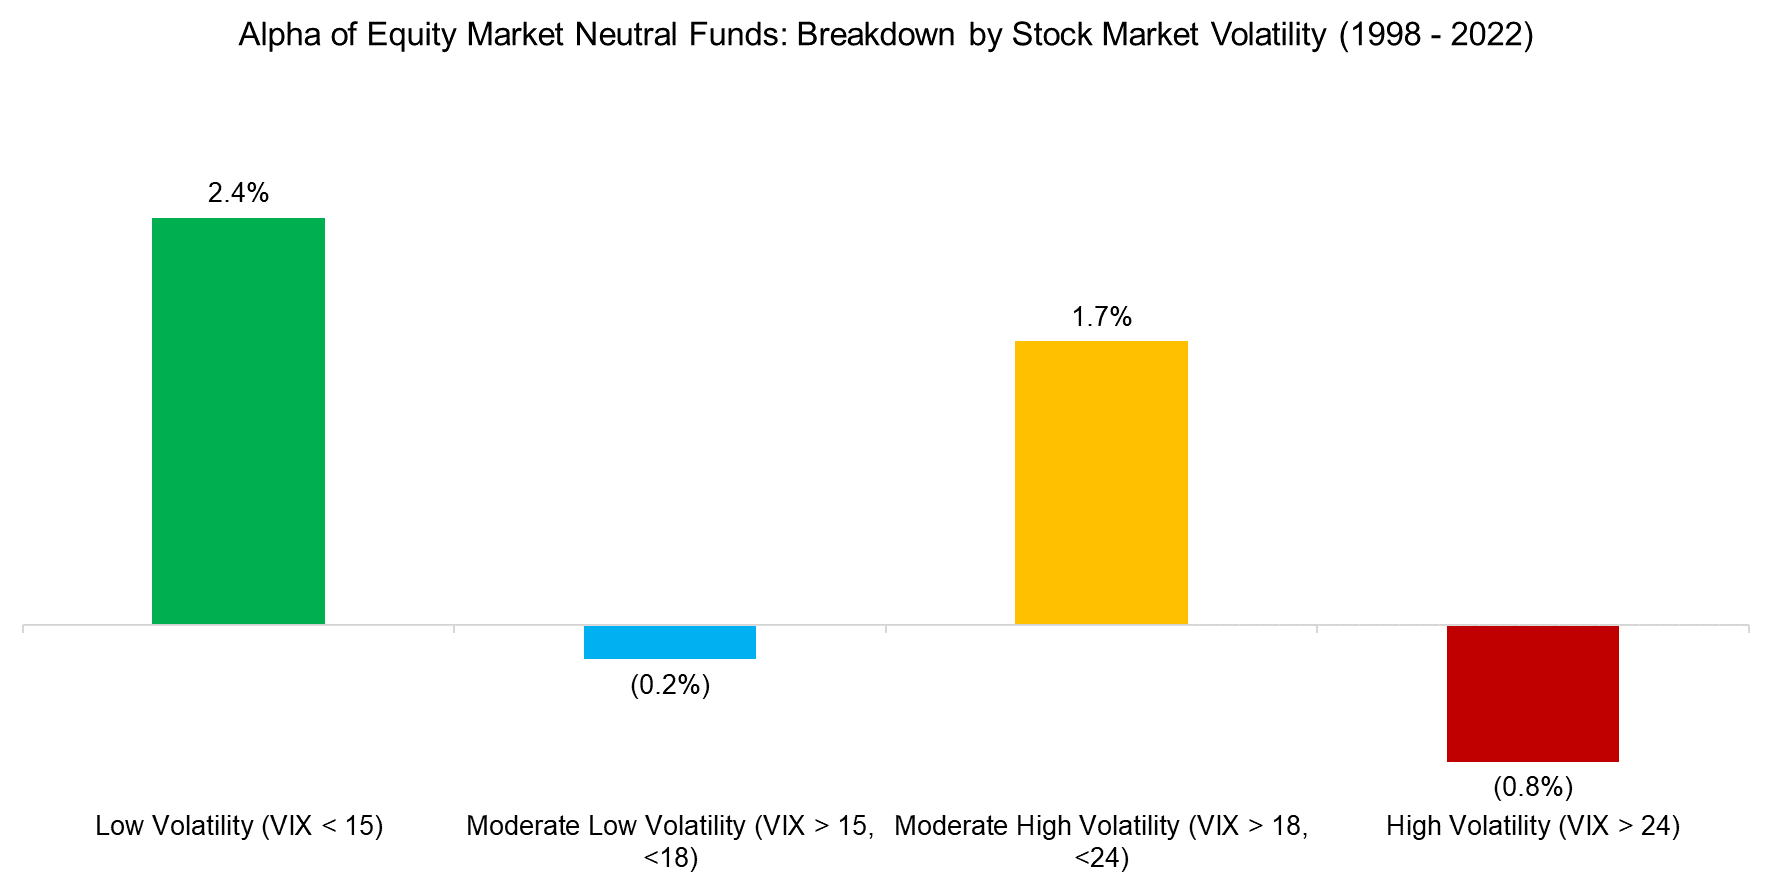 Alpha of Equity Market Neutral Funds Breakdown by Stock Market Volatility (1998 - 2022)